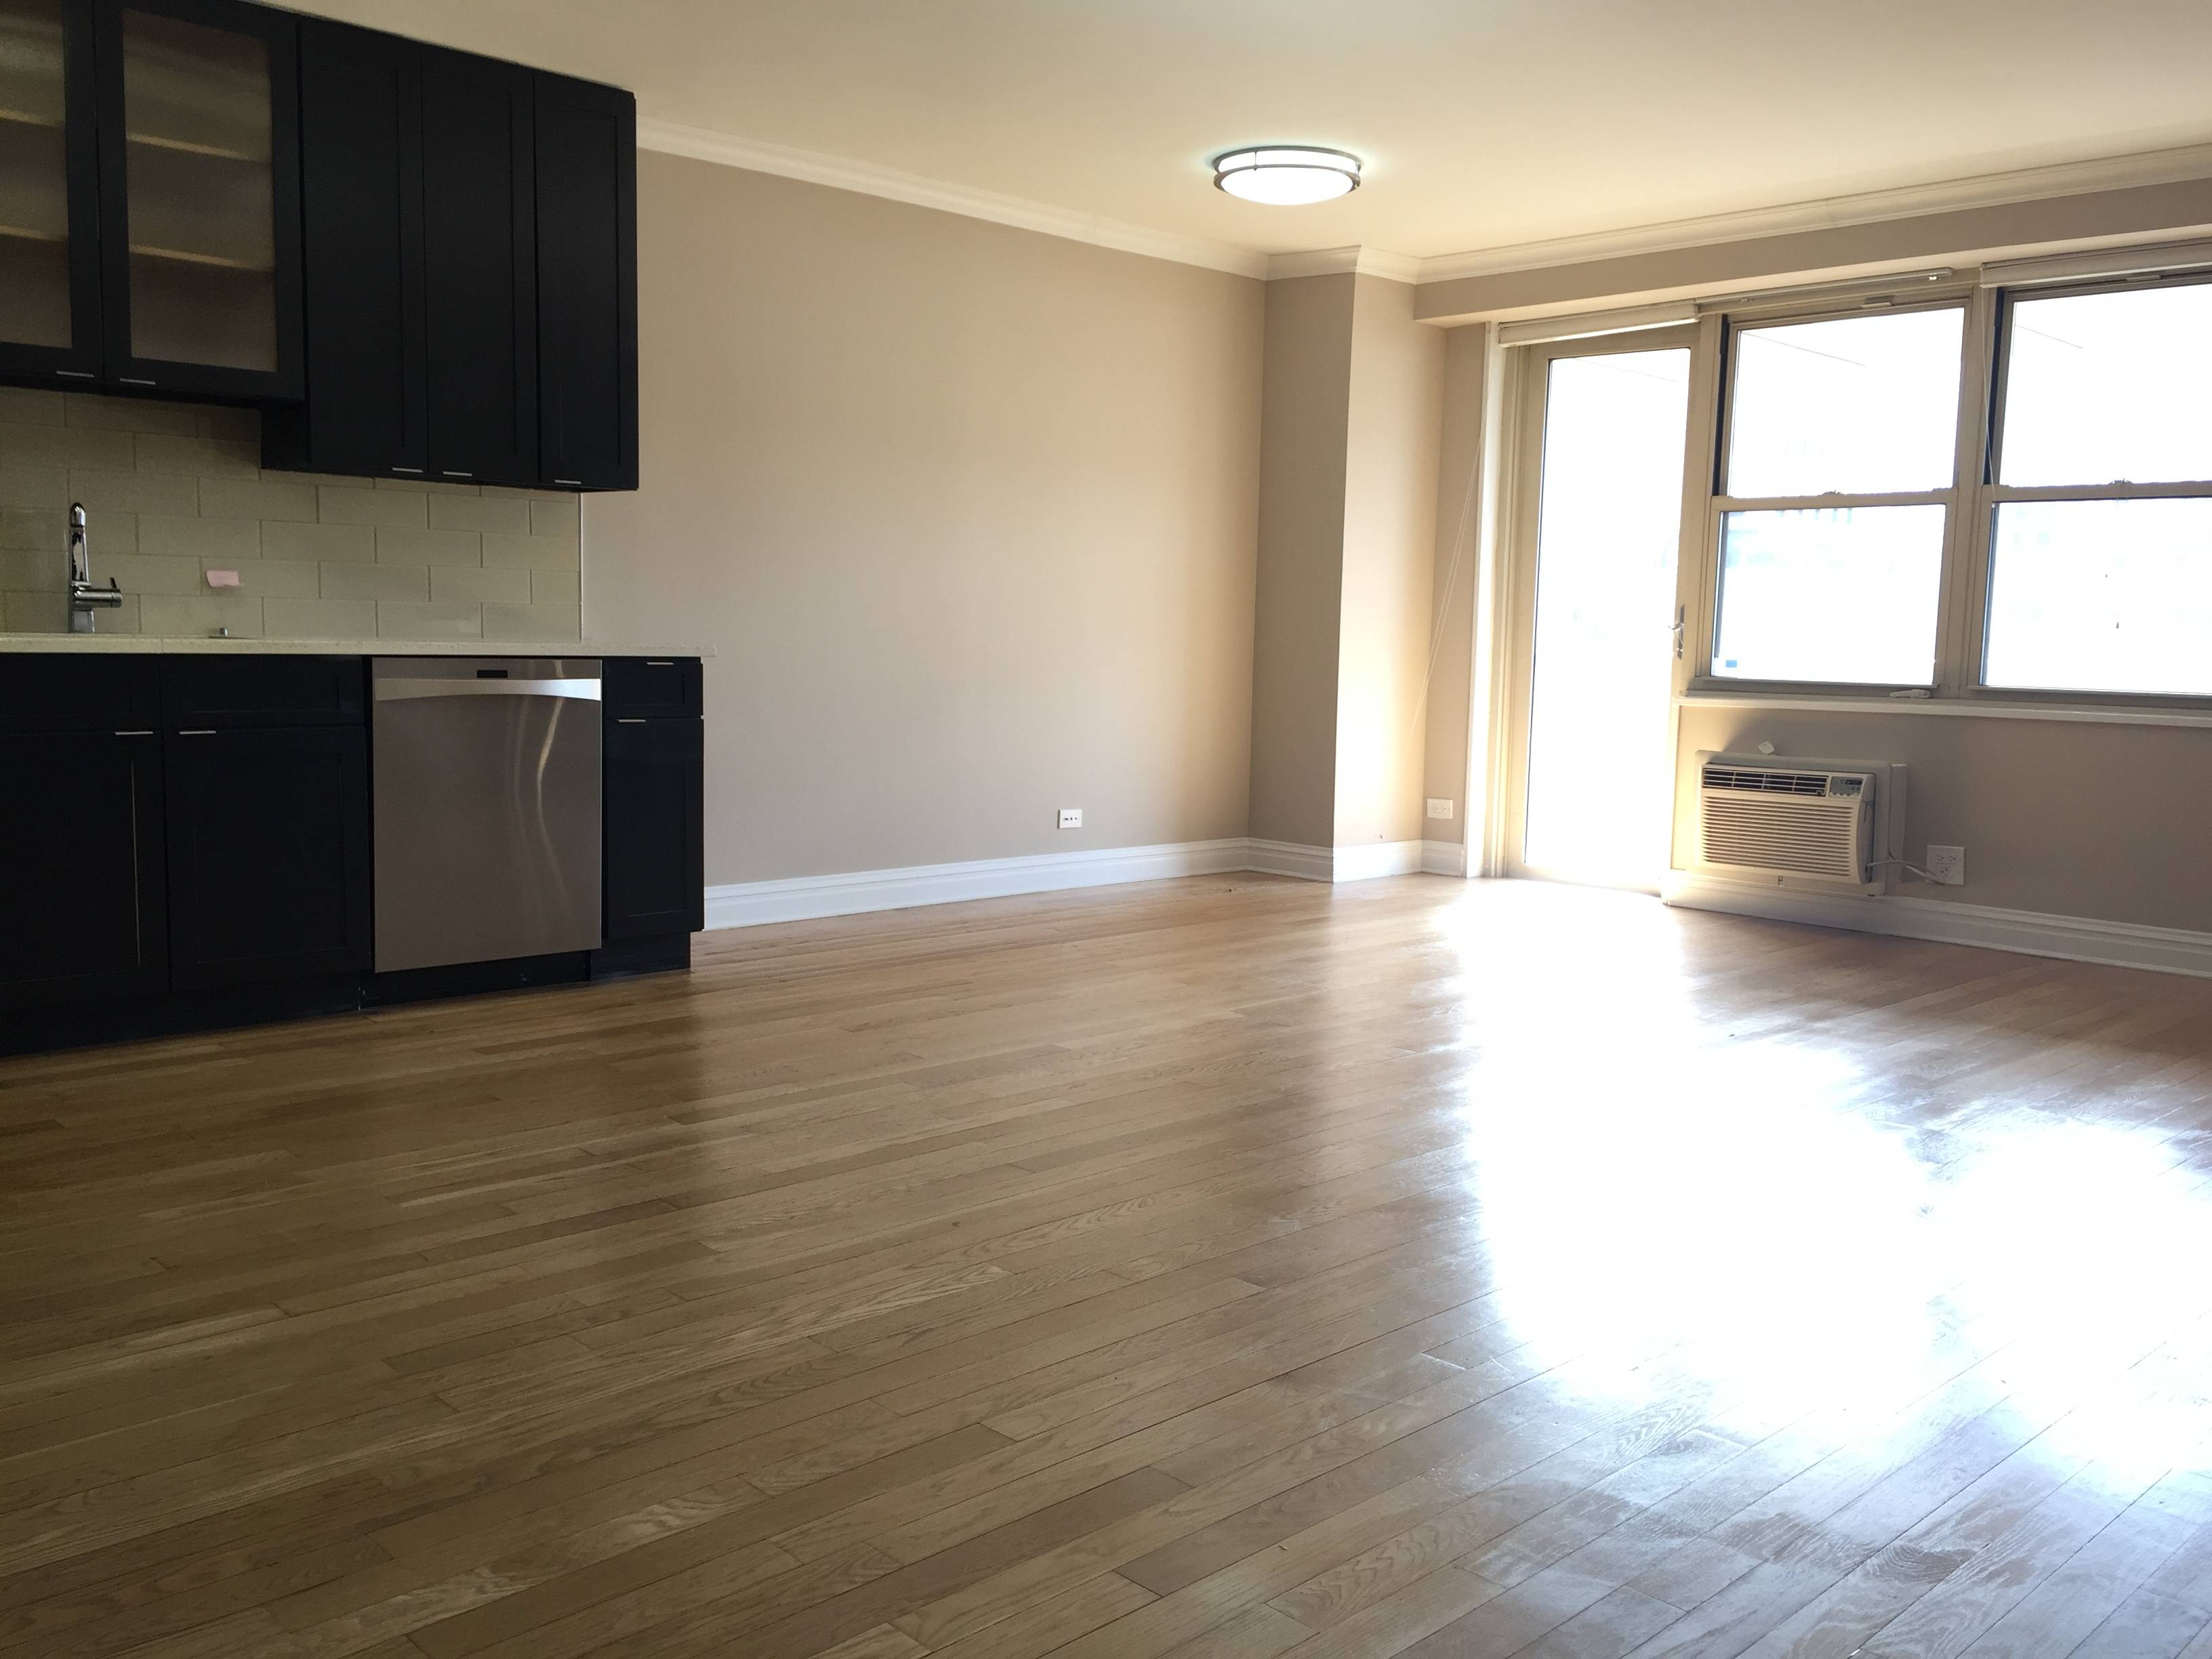 TriBeCa: Large 1 Bedroom with Washer/Dryer in Unit & Two Months Free